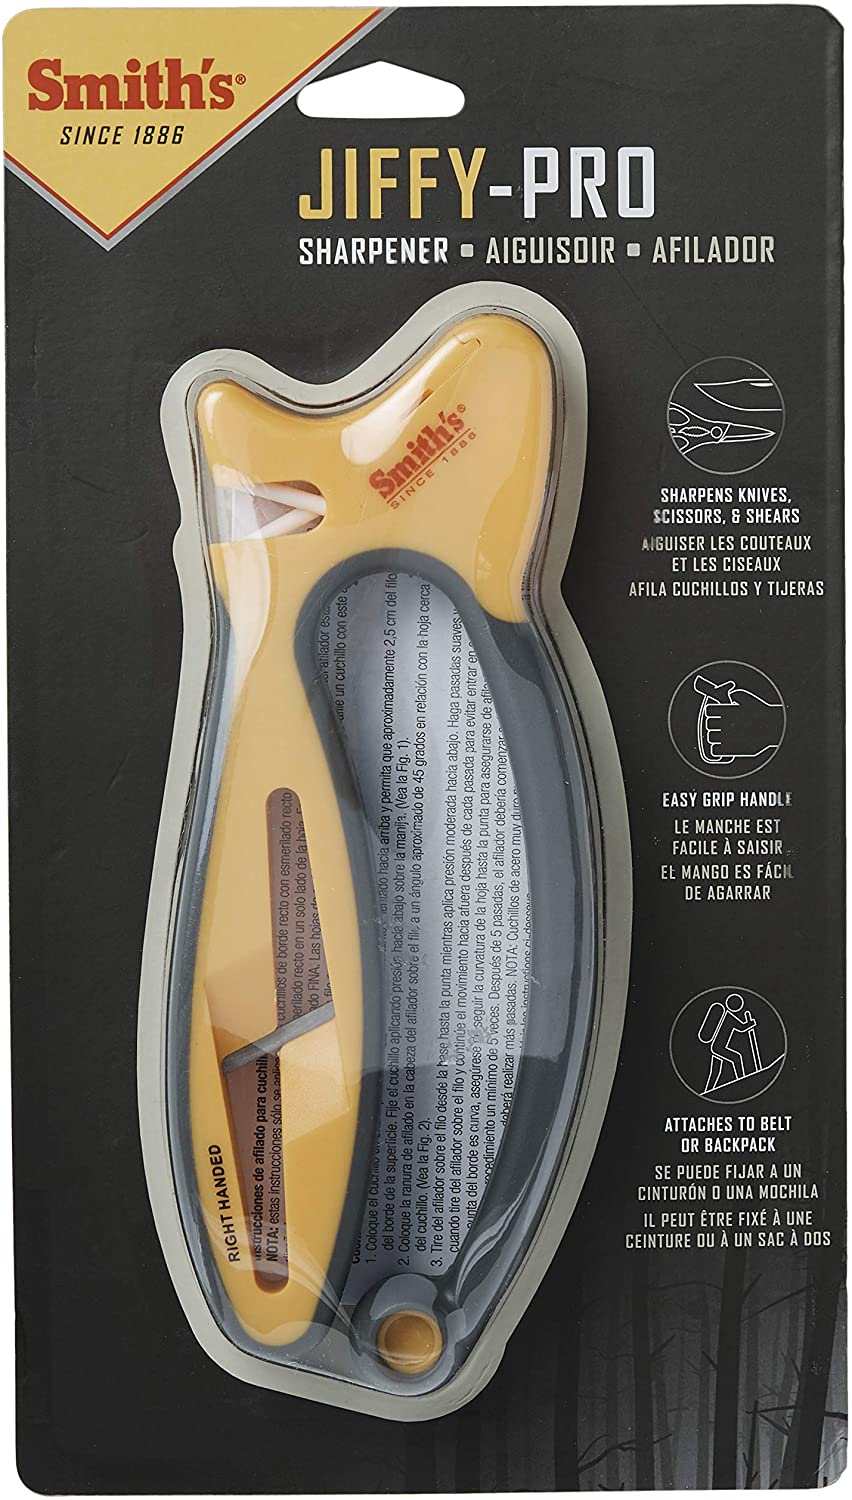 Smith's Jiffy-Pro Handheld Knife Sharpener - $4.04 @ Amazon + FS with Prime